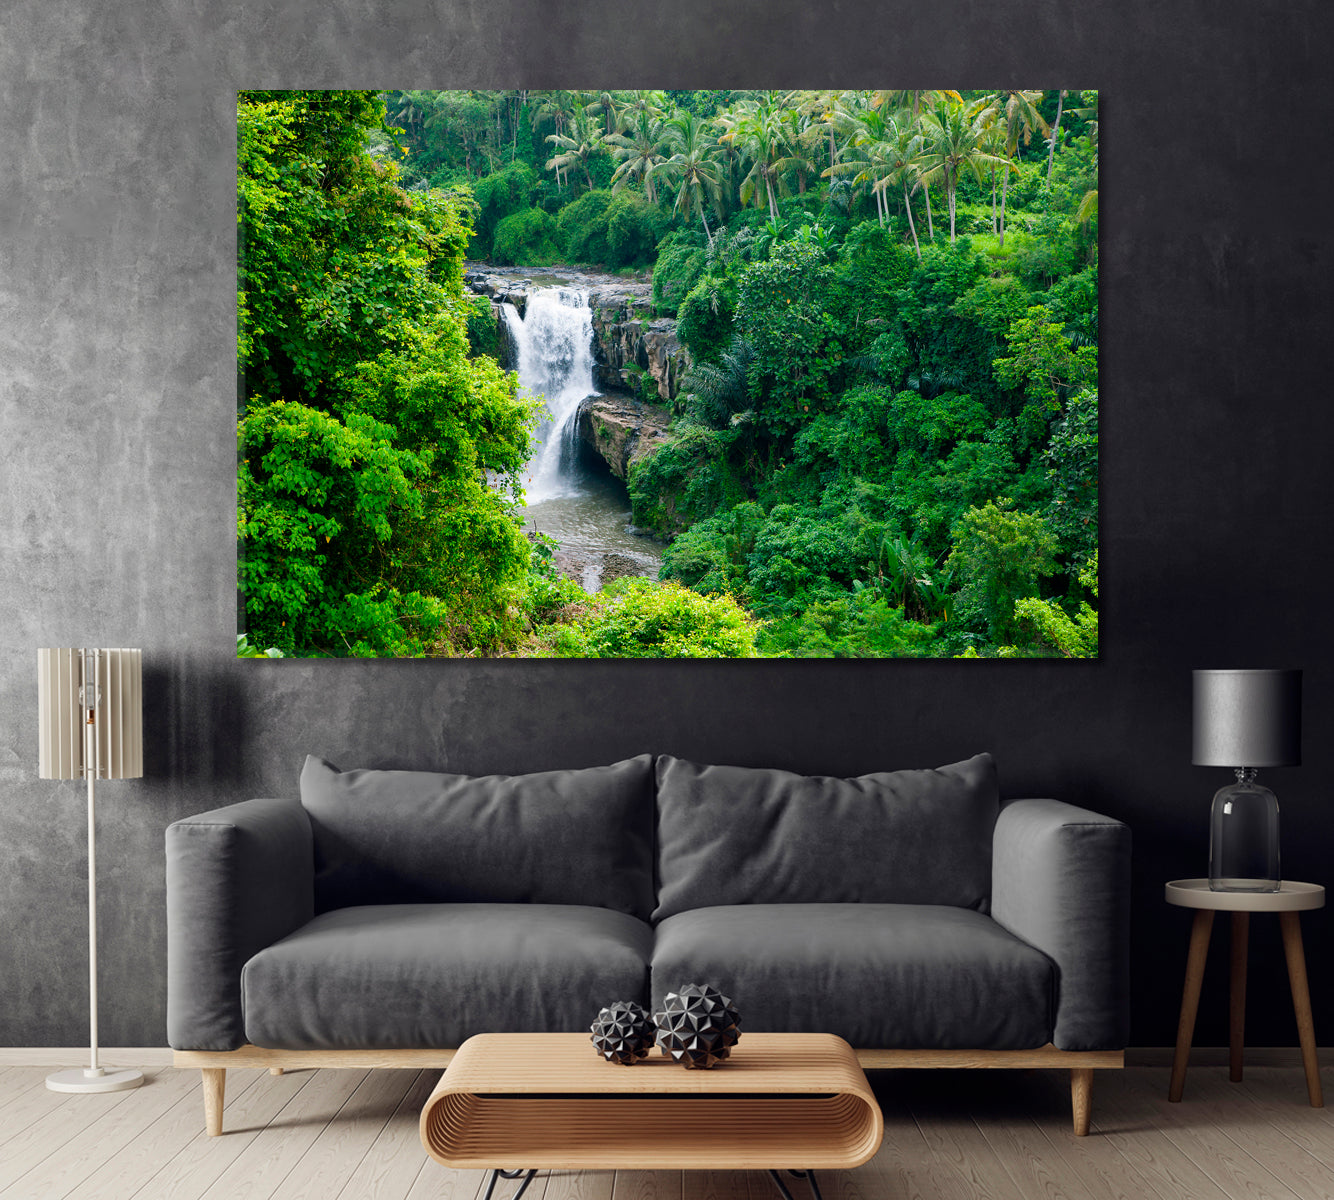 Jungle Waterfall Canvas Print ArtLexy 1 Panel 24"x16" inches 